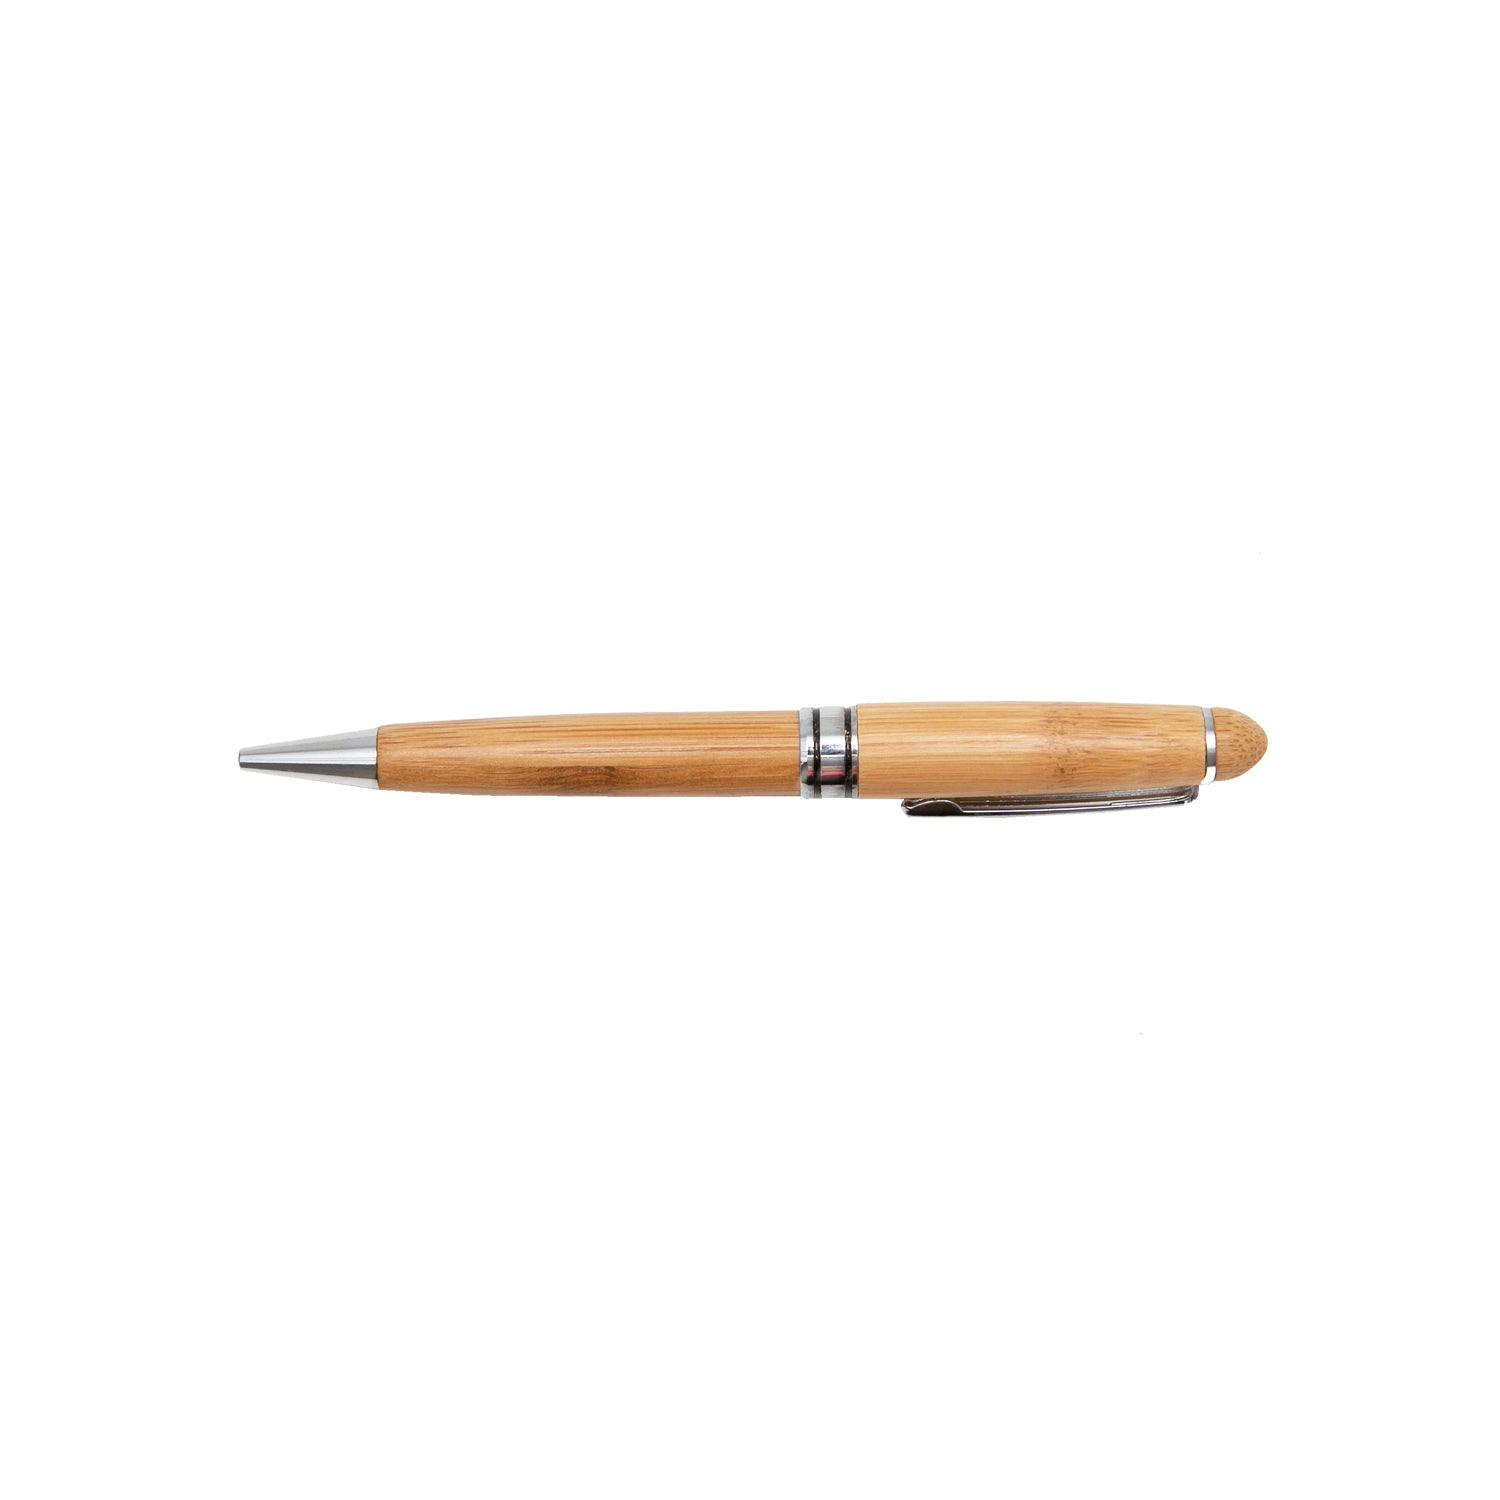 Funk Trunk Bamboo Twist Pen for your everyday writing convenience